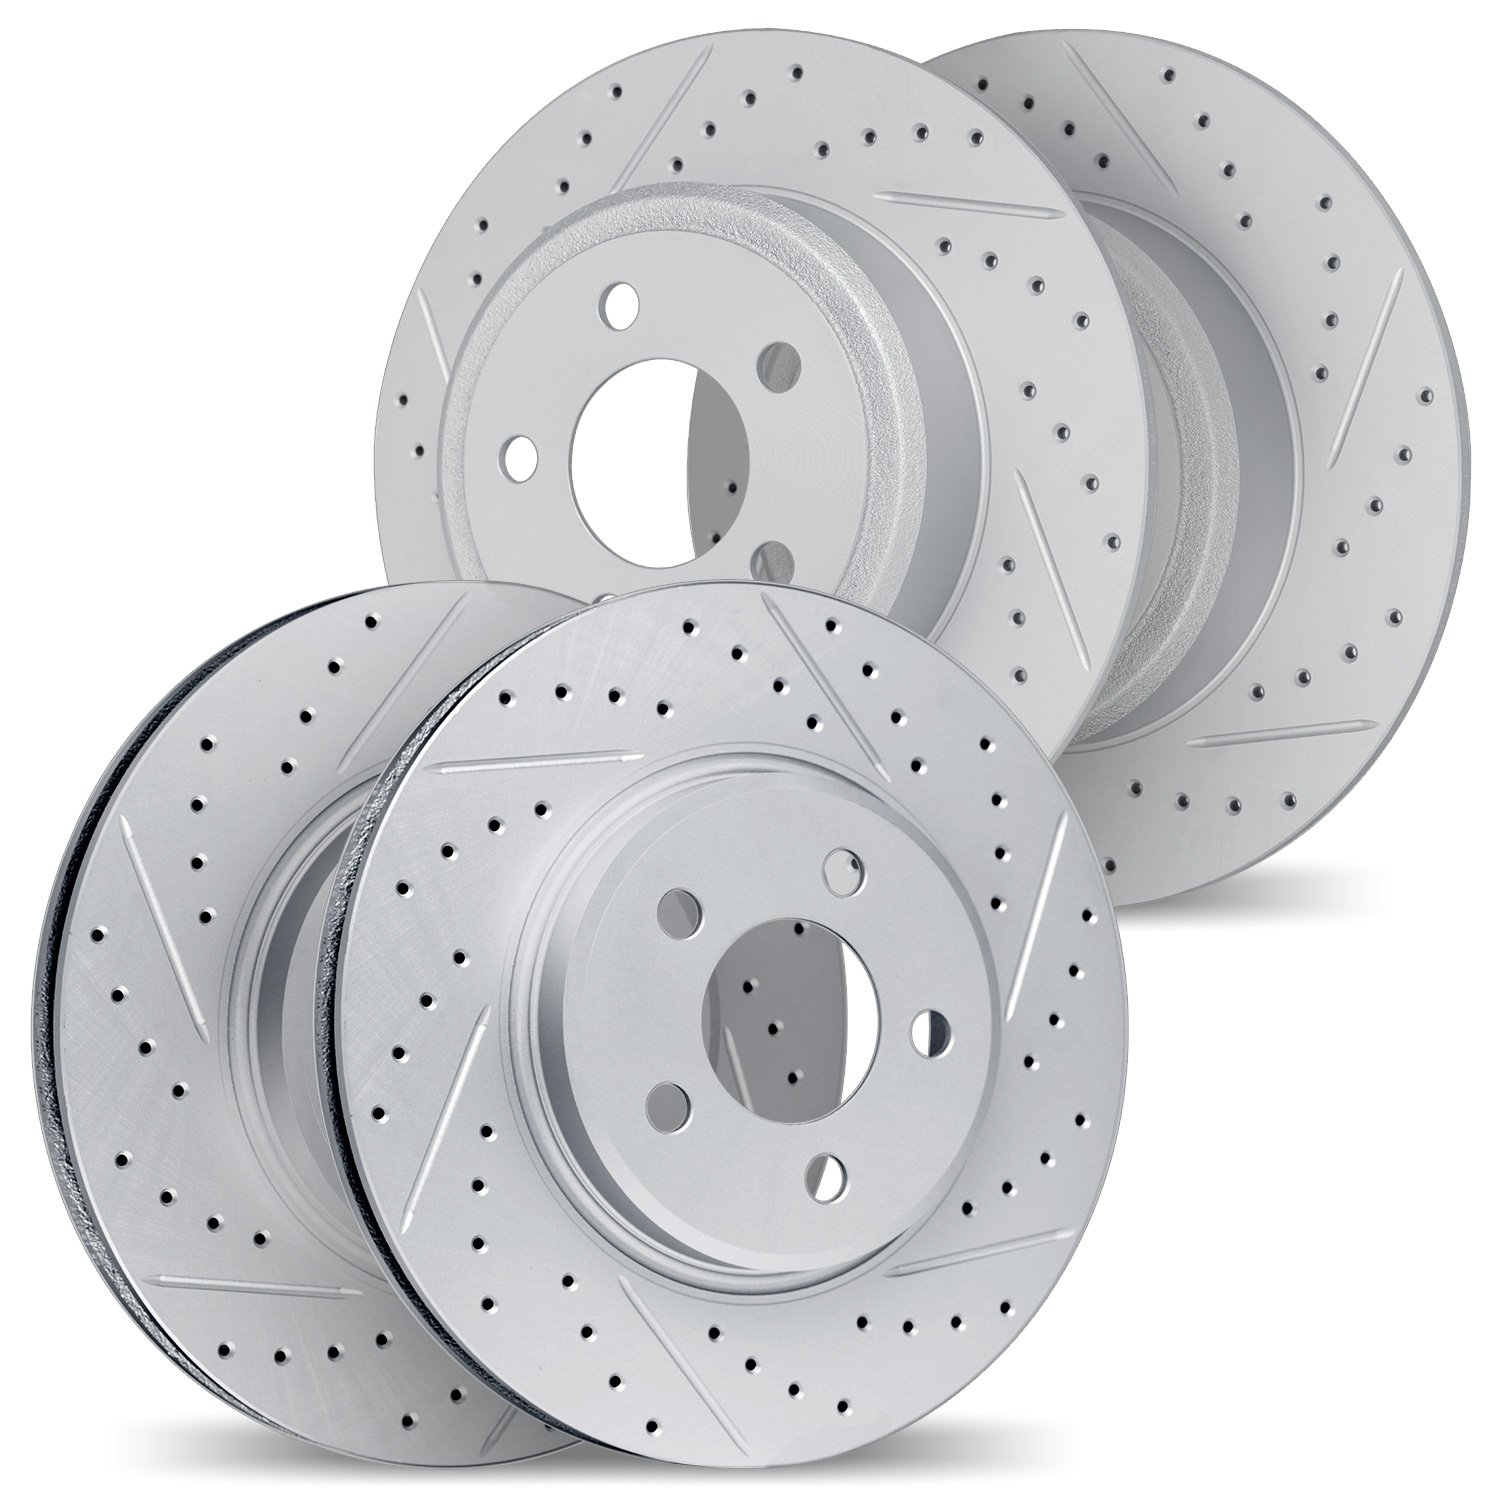 2004-11001 Geoperformance Drilled/Slotted Brake Rotors, 2018-2020 Multiple Makes/Models, Position: Front and Rear